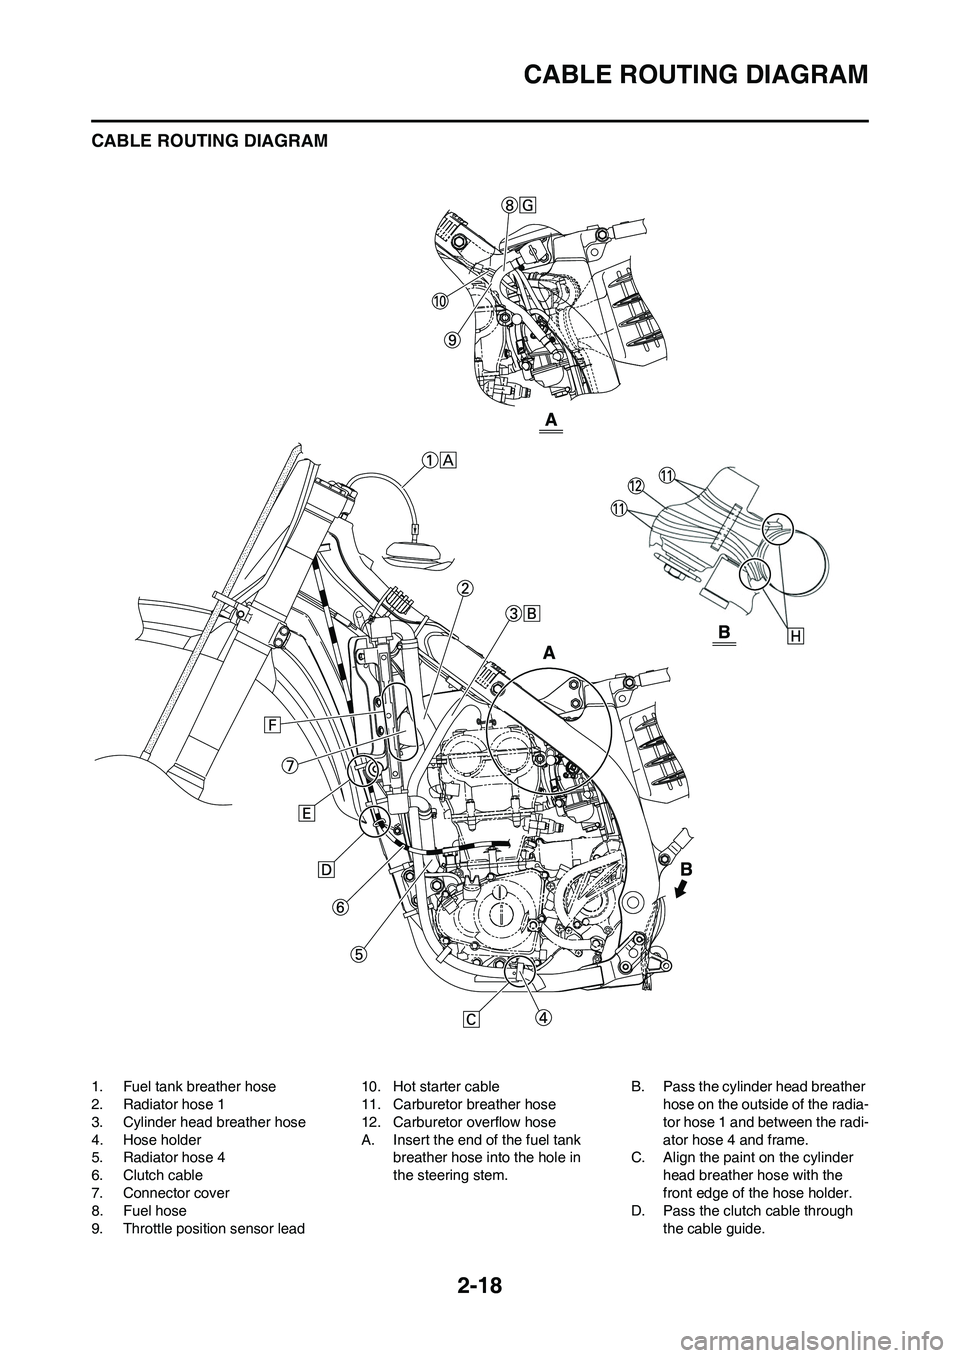 YAMAHA YZ450F 2009  Owners Manual 2-18
CABLE ROUTING DIAGRAM
CABLE ROUTING DIAGRAM
1. Fuel tank breather hose
2. Radiator hose 1
3. Cylinder head breather hose
4. Hose holder
5. Radiator hose 4
6. Clutch cable
7. Connector cover
8. Fu